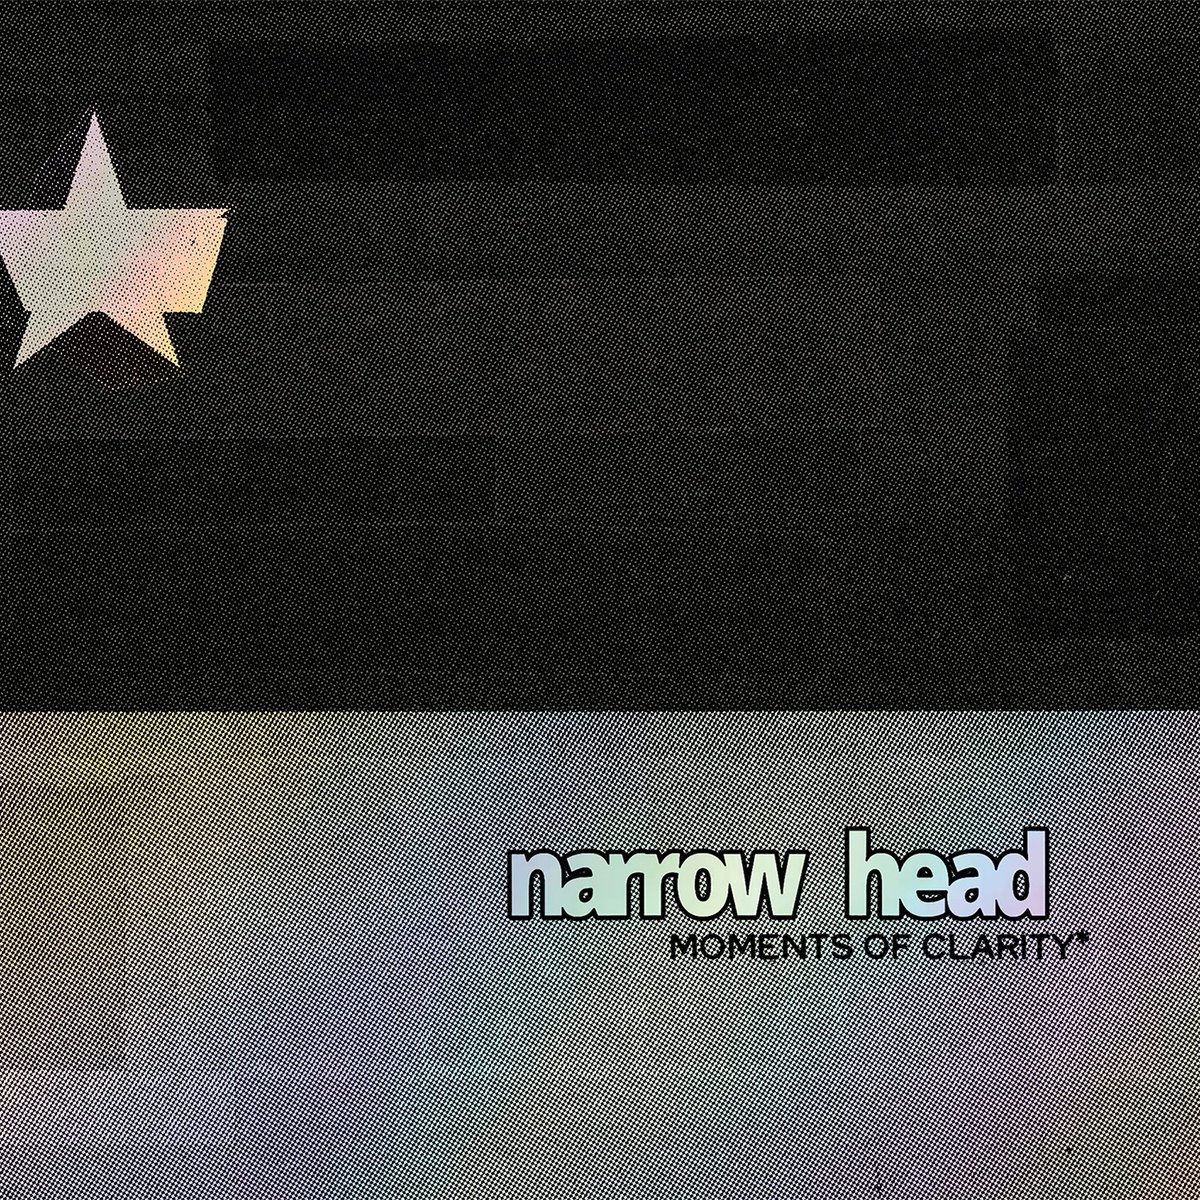 The Deluxe Edition of @NARROW_HEAD’s album MOMENTS OF CLARITY, featuring additional remixes & bonus tracks, is out today. Grab the record on deluxe CD/DVD, and hear the full thing here: lnk.to/MoC-DLX